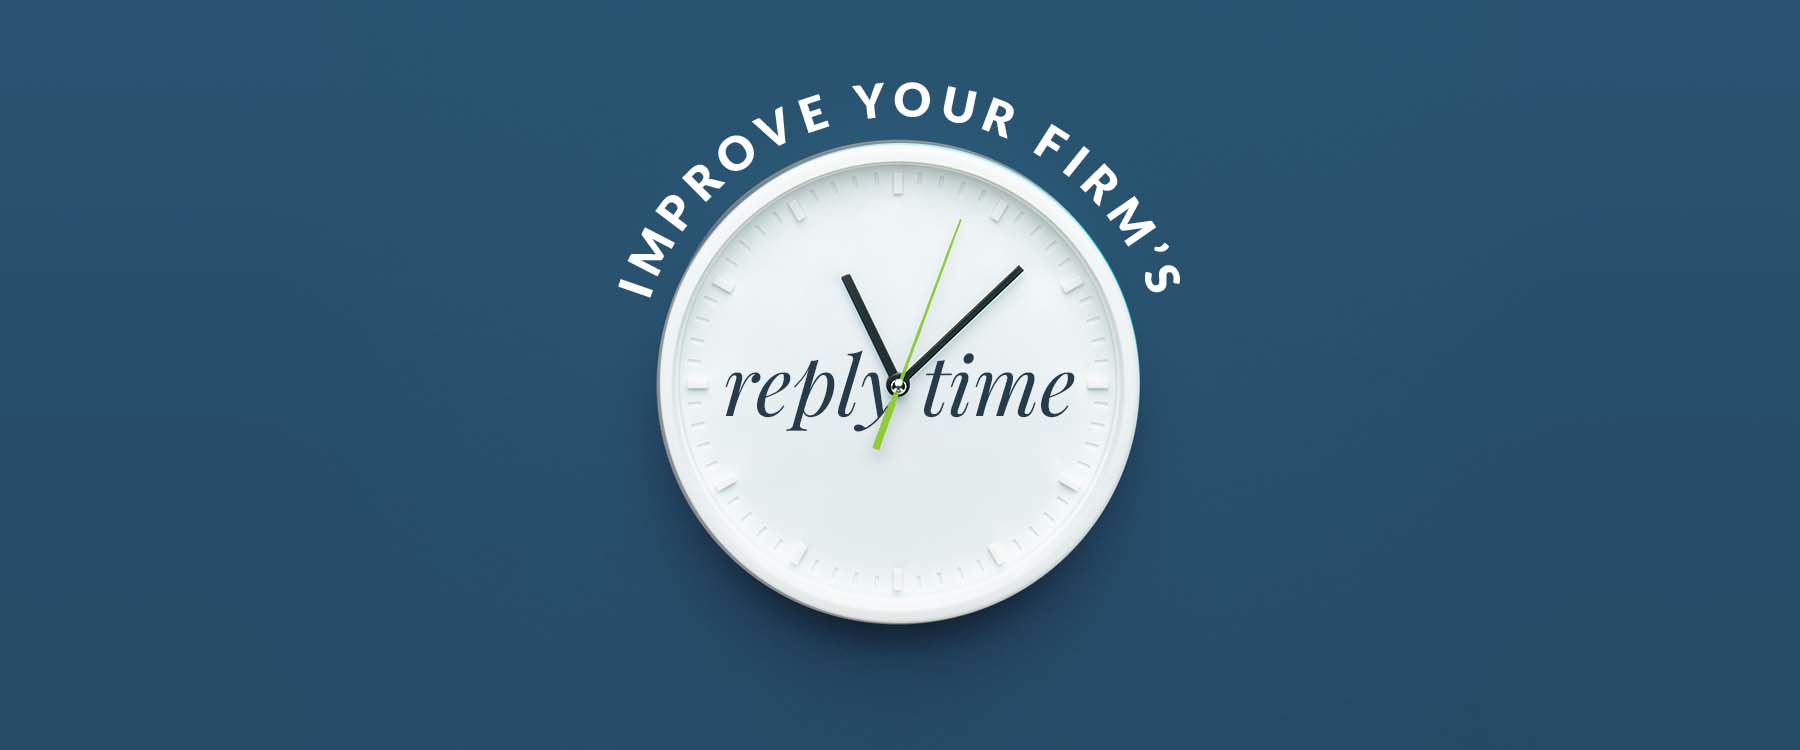 Graphic image of clock displaying 'reply time'